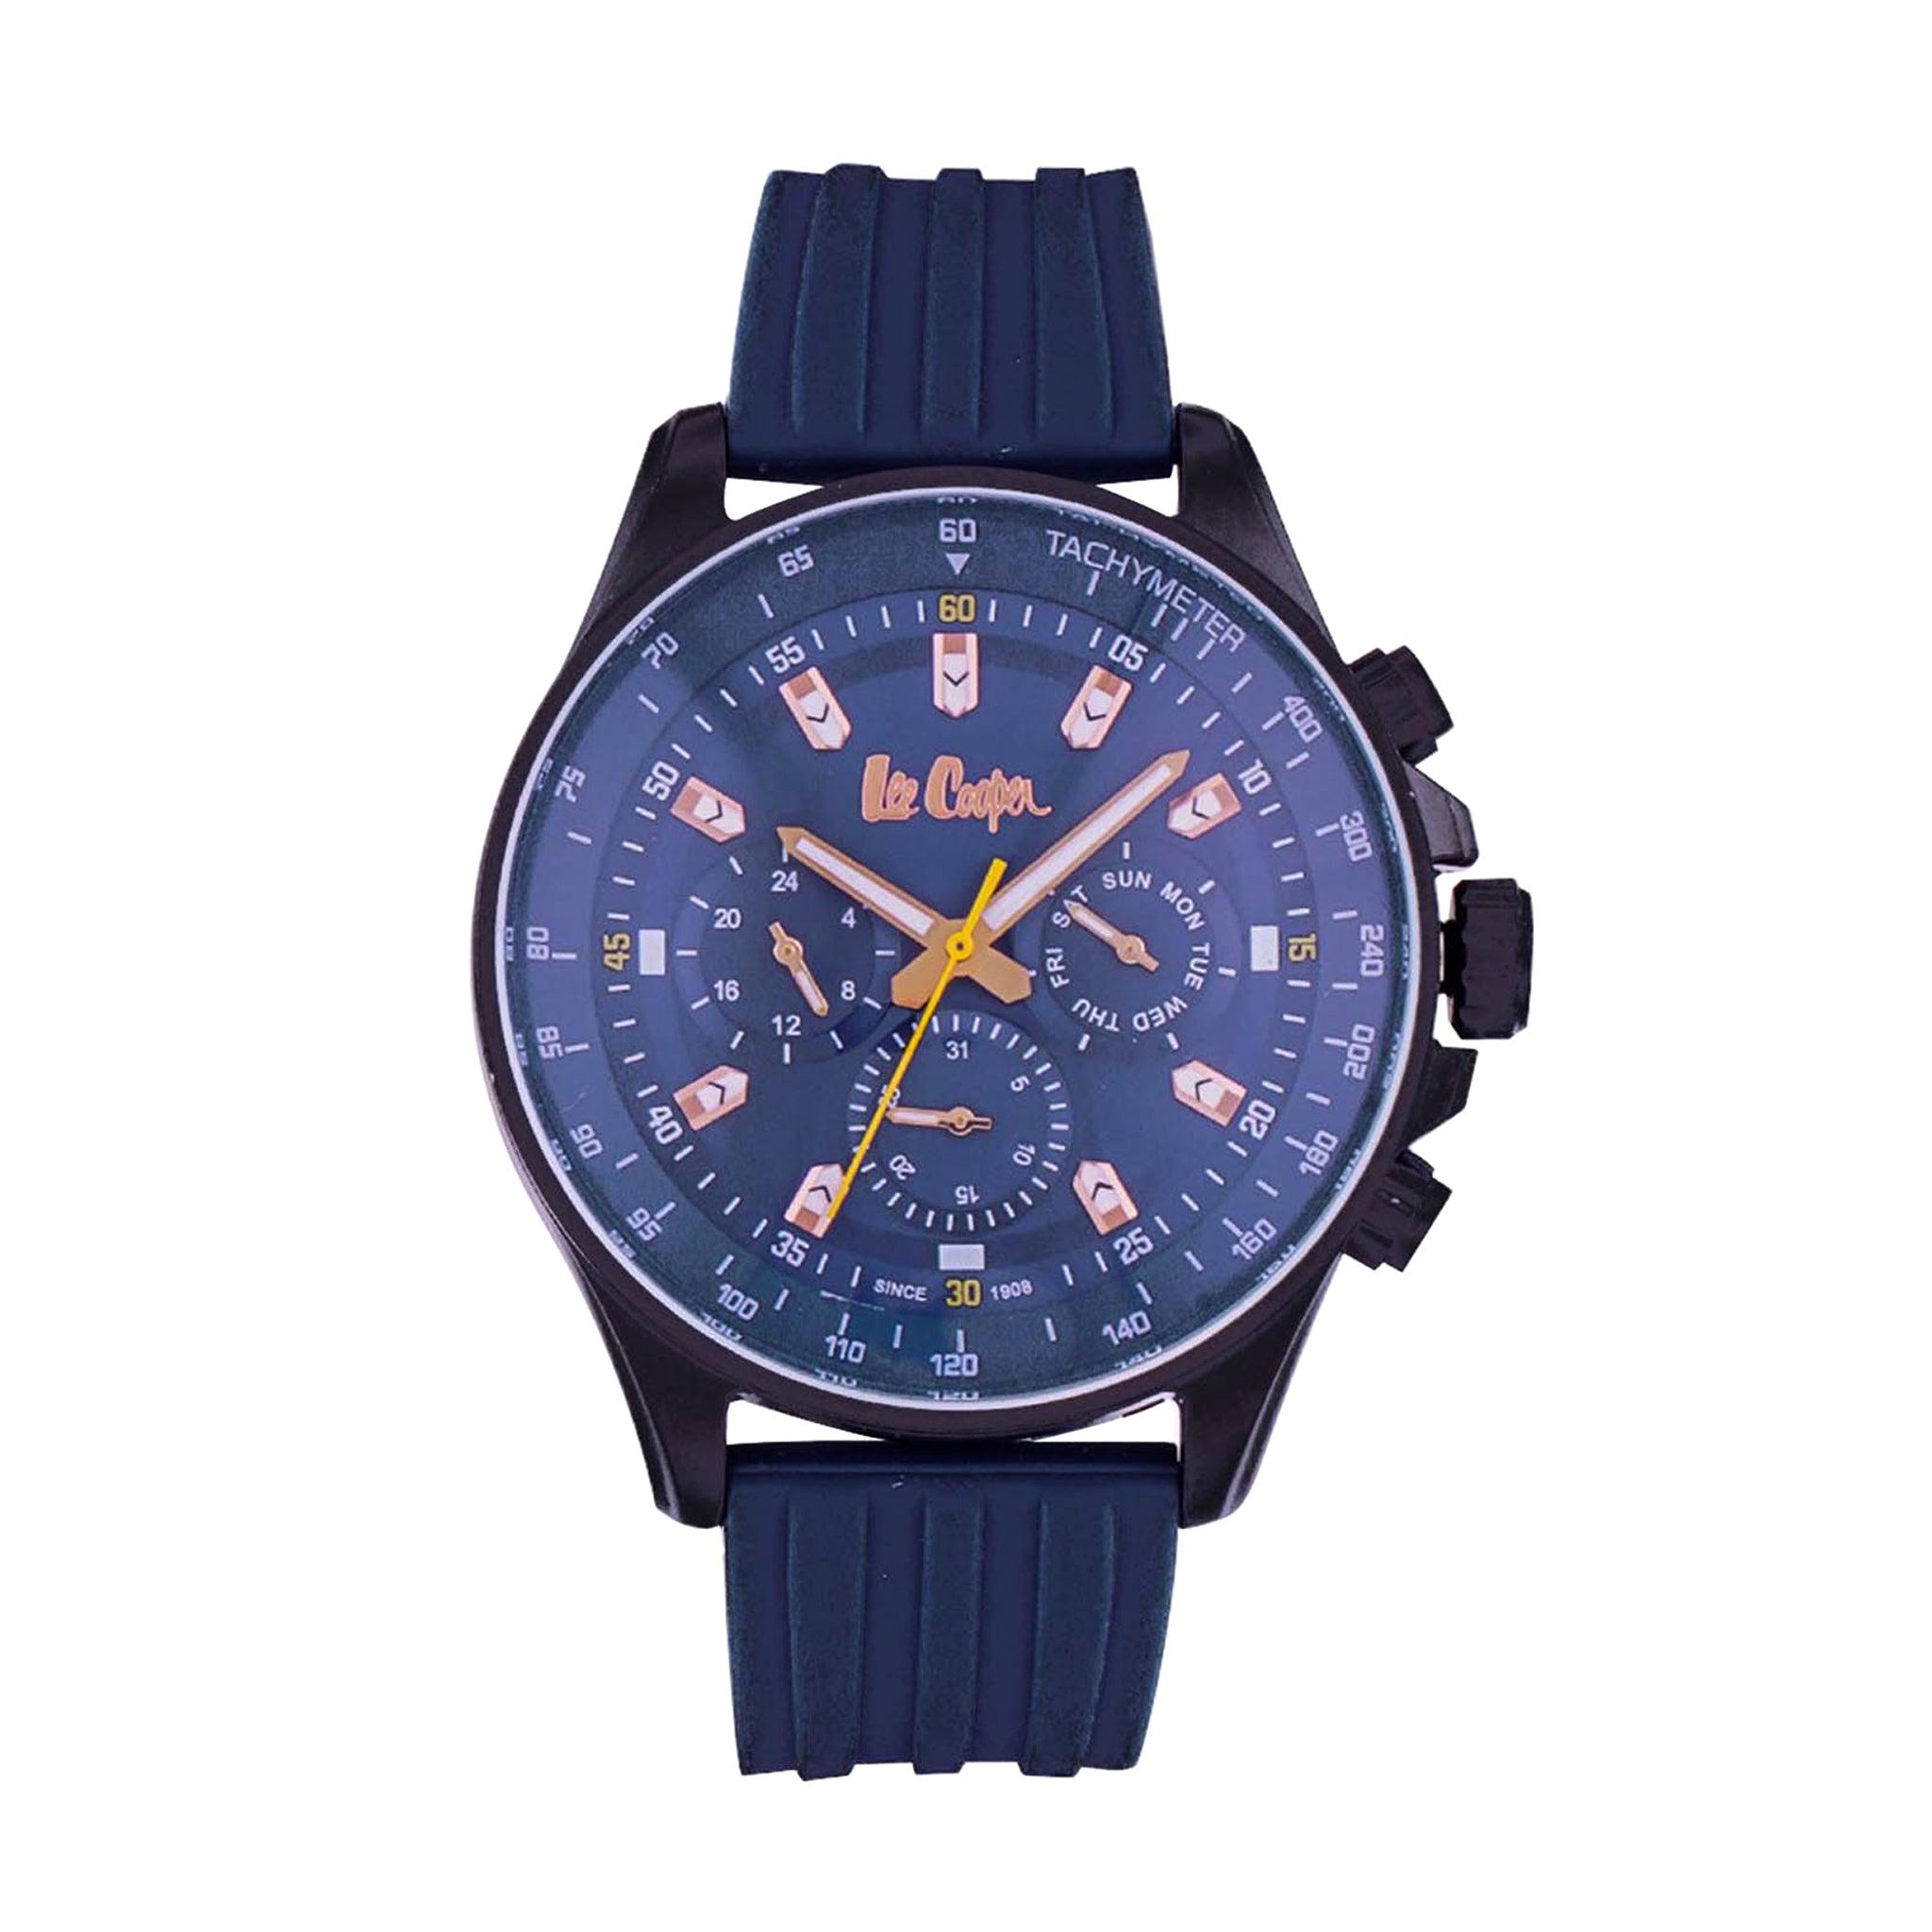 Lee Cooper Multifunction Blue Round Dial Men's Watch €“ Lc06977.699